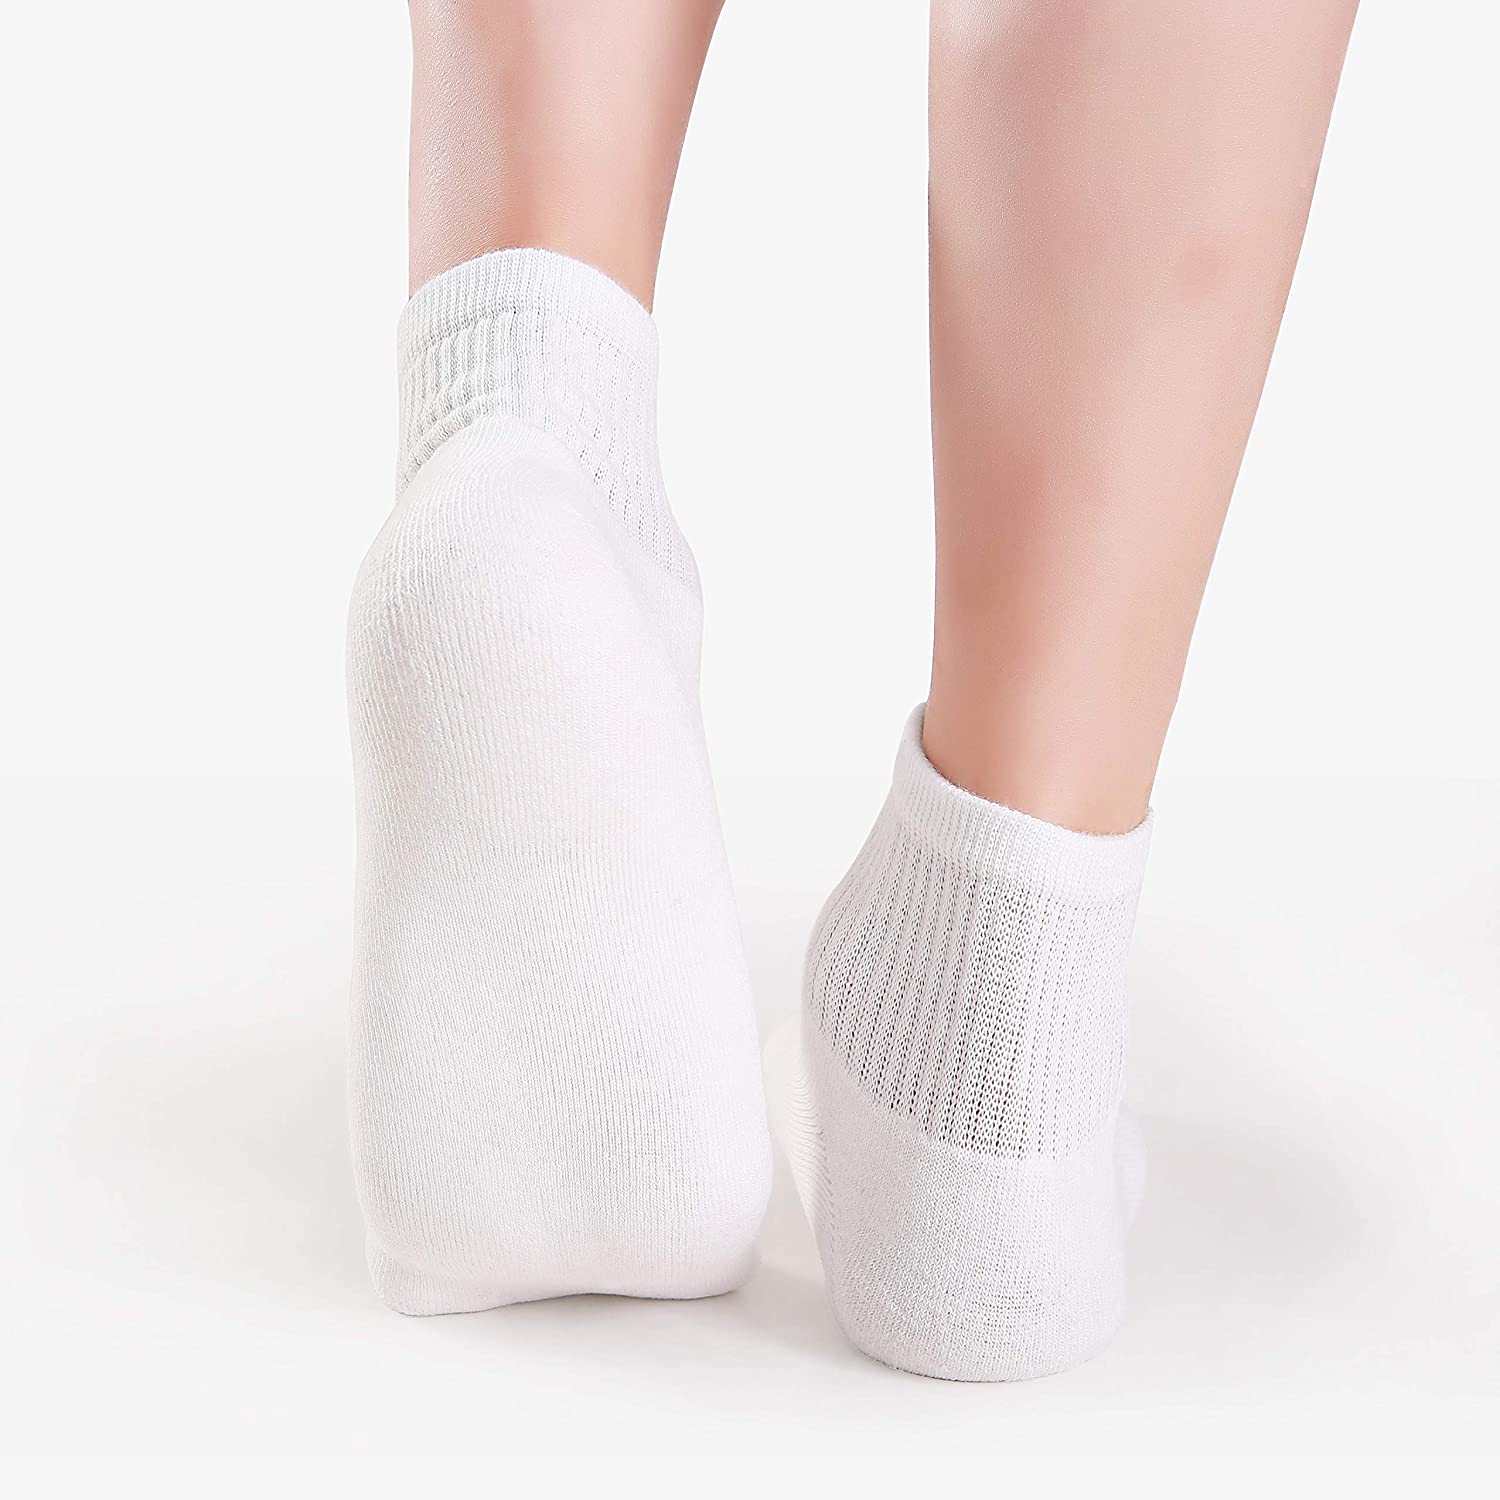 LIMPIDEE Womens Athletic Ankle Socks 6 Paris 7-10 Low Cut, White, Size ...